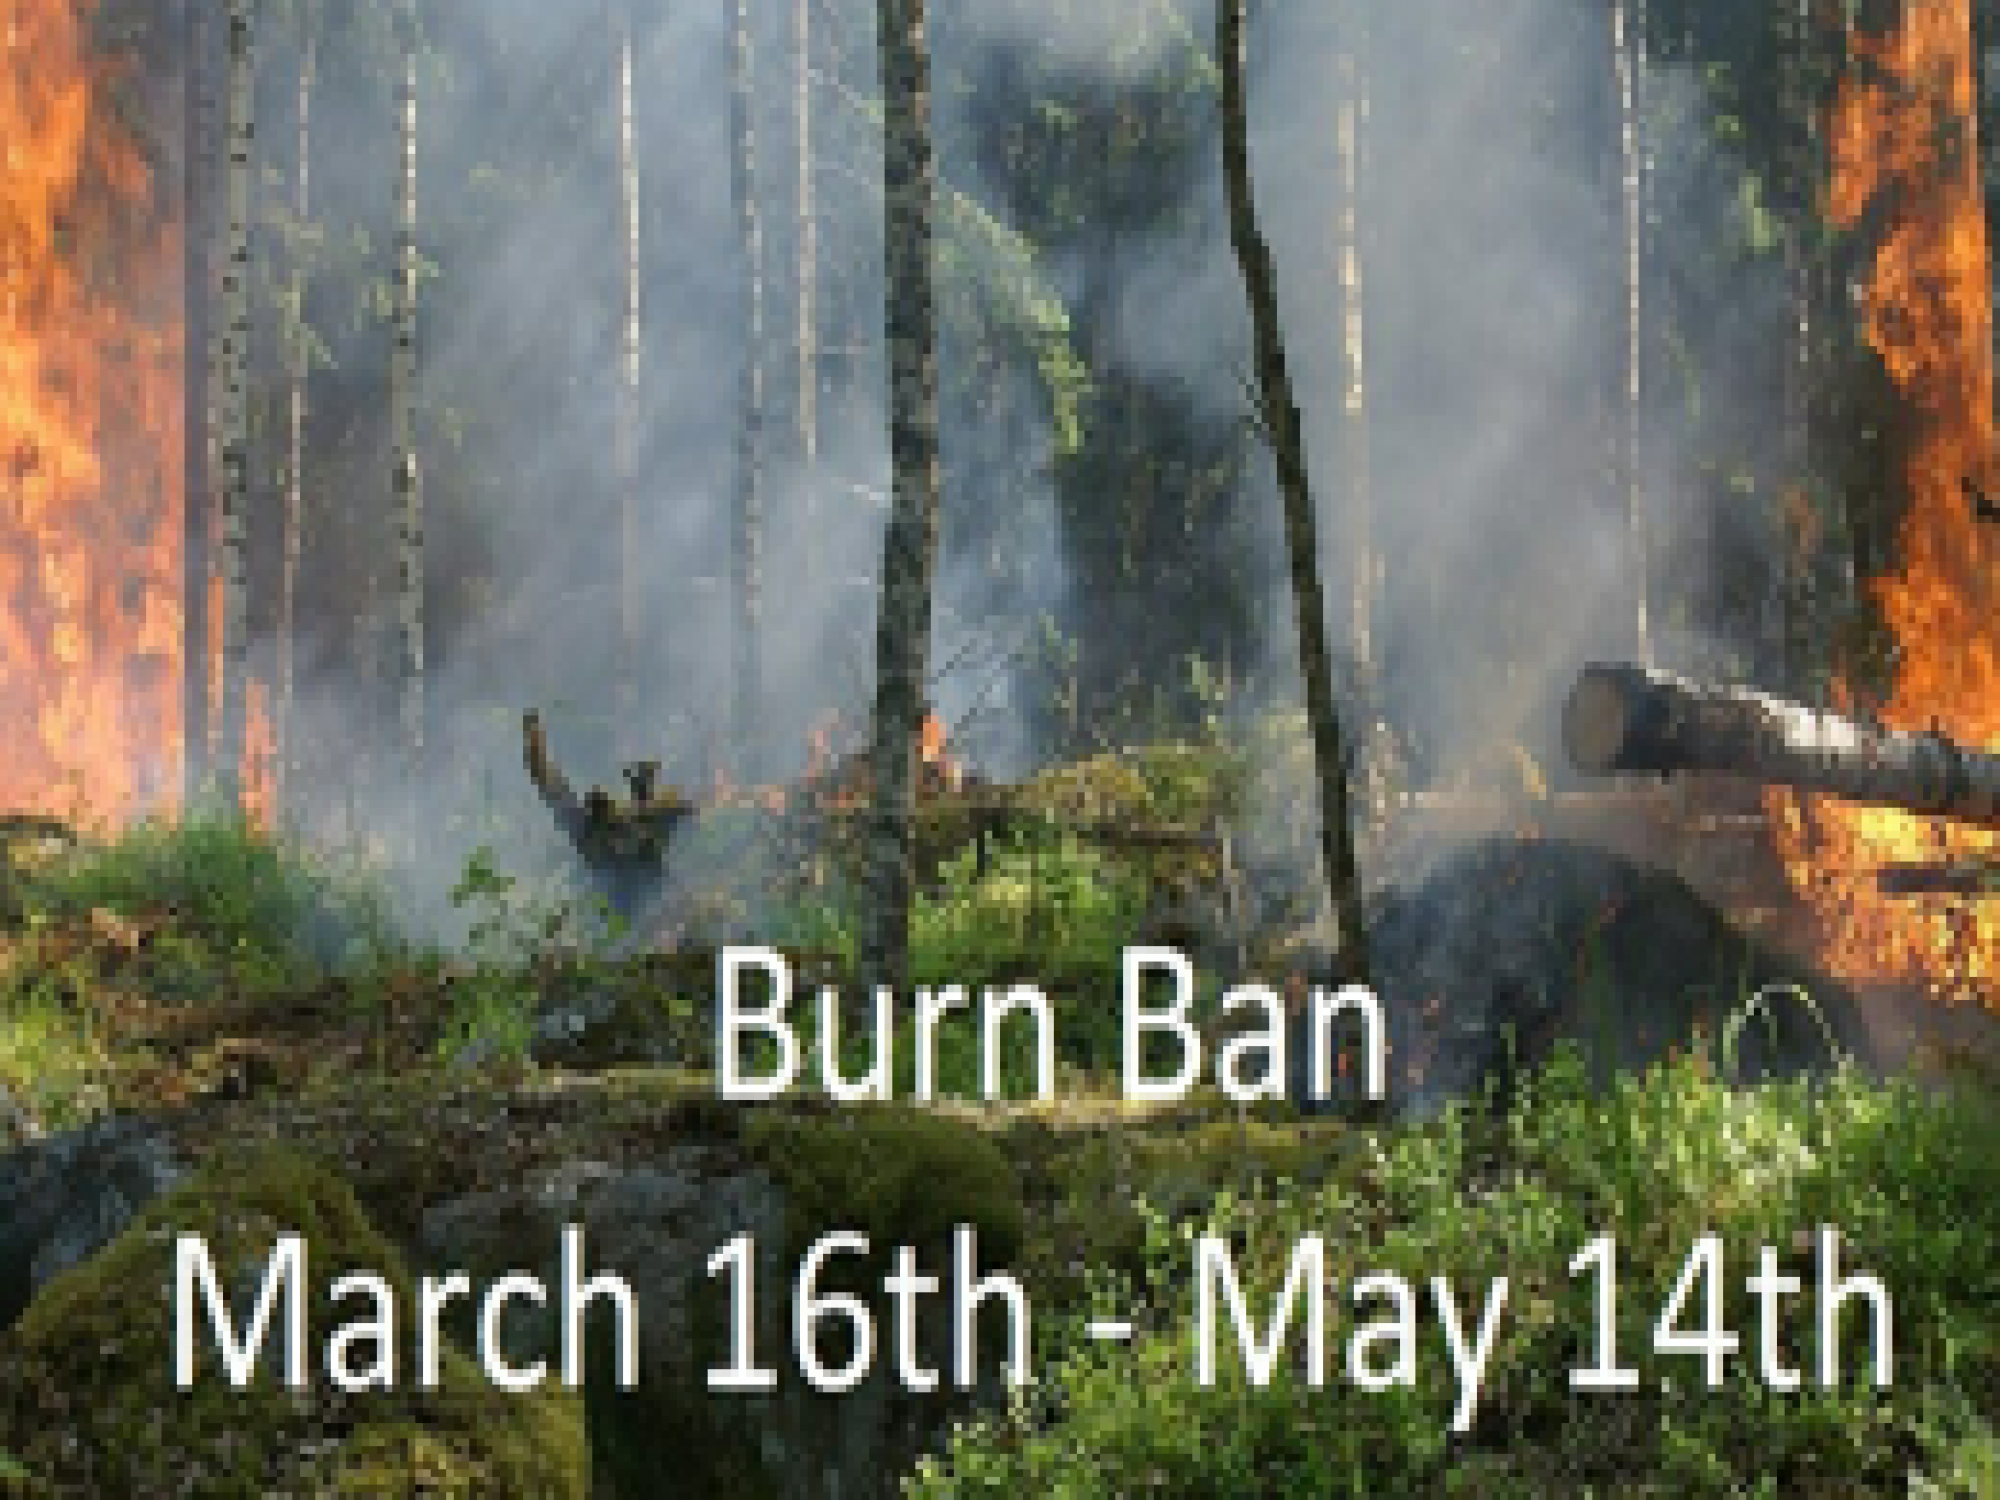 Chautauqua County Officials Remind Residents of Ongoing Burn Ban